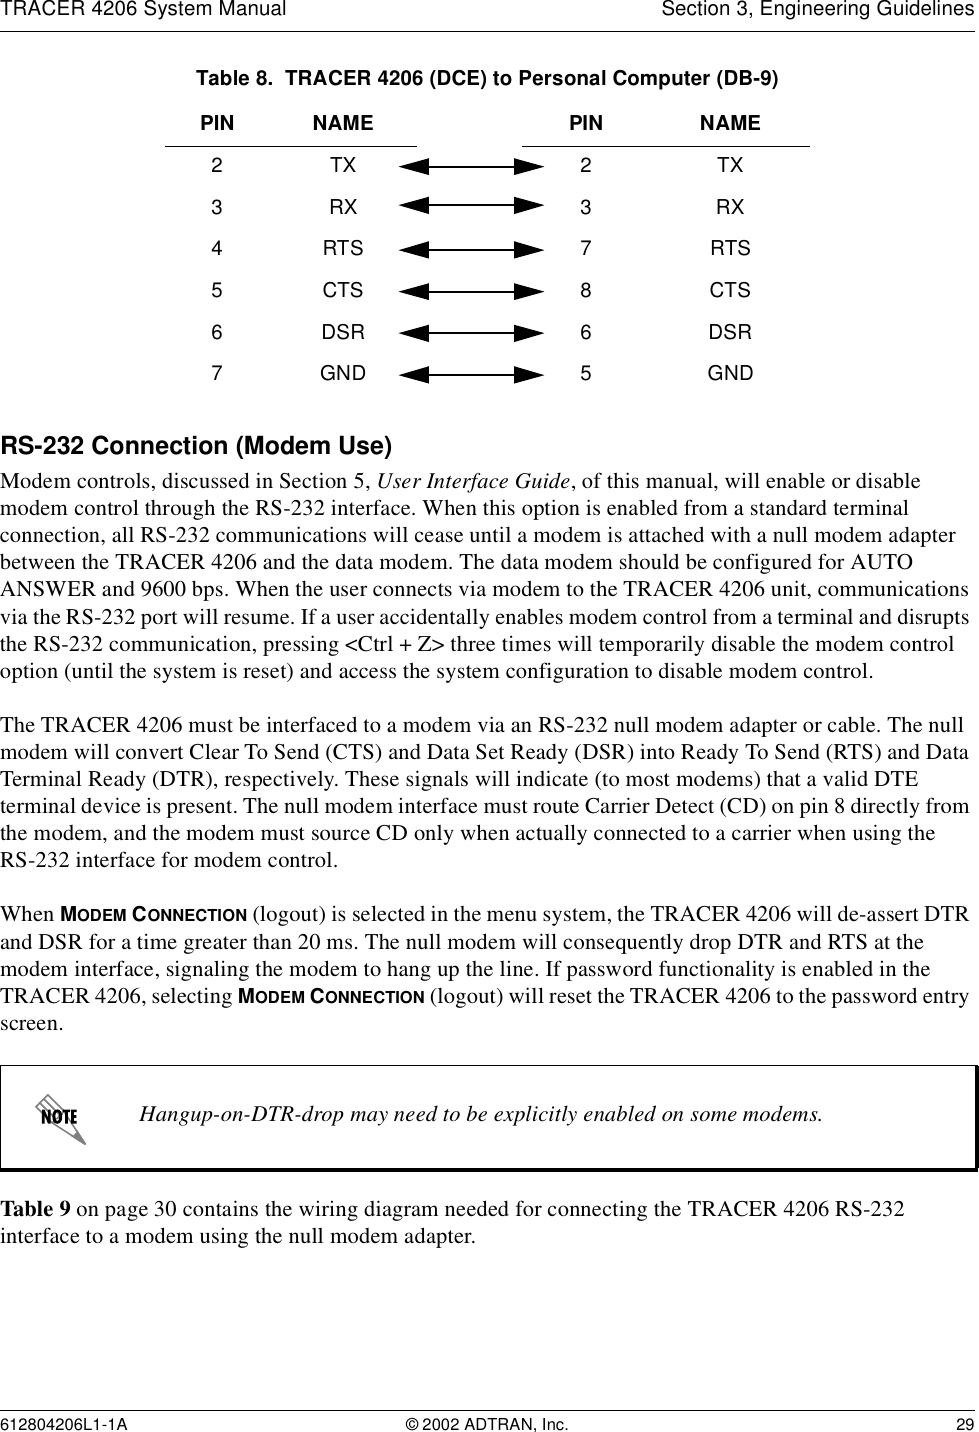 TRACER 4206 System Manual Section 3, Engineering Guidelines612804206L1-1A © 2002 ADTRAN, Inc. 29RS-232 Connection (Modem Use)Modem controls, discussed in Section 5, User Interface Guide, of this manual, will enable or disable modem control through the RS-232 interface. When this option is enabled from a standard terminal connection, all RS-232 communications will cease until a modem is attached with a null modem adapter between the TRACER 4206 and the data modem. The data modem should be configured for AUTO ANSWER and 9600 bps. When the user connects via modem to the TRACER 4206 unit, communications via the RS-232 port will resume. If a user accidentally enables modem control from a terminal and disrupts the RS-232 communication, pressing &lt;Ctrl + Z&gt; three times will temporarily disable the modem control option (until the system is reset) and access the system configuration to disable modem control.The TRACER 4206 must be interfaced to a modem via an RS-232 null modem adapter or cable. The null modem will convert Clear To Send (CTS) and Data Set Ready (DSR) into Ready To Send (RTS) and Data Terminal Ready (DTR), respectively. These signals will indicate (to most modems) that a valid DTE terminal device is present. The null modem interface must route Carrier Detect (CD) on pin 8 directly from the modem, and the modem must source CD only when actually connected to a carrier when using the RS-232 interface for modem control. When MODEM CONNECTION (logout) is selected in the menu system, the TRACER 4206 will de-assert DTR and DSR for a time greater than 20 ms. The null modem will consequently drop DTR and RTS at the modem interface, signaling the modem to hang up the line. If password functionality is enabled in the TRACER 4206, selecting MODEM CONNECTION (logout) will reset the TRACER 4206 to the password entry screen.Table 9 on page 30 contains the wiring diagram needed for connecting the TRACER 4206 RS-232 interface to a modem using the null modem adapter.Table 8.  TRACER 4206 (DCE) to Personal Computer (DB-9)PIN NAME PIN NAME2TX 2TX3RX 3RX4RTS 7RTS5CTS 8CTS6DSR 6DSR7GND 5GNDHangup-on-DTR-drop may need to be explicitly enabled on some modems.